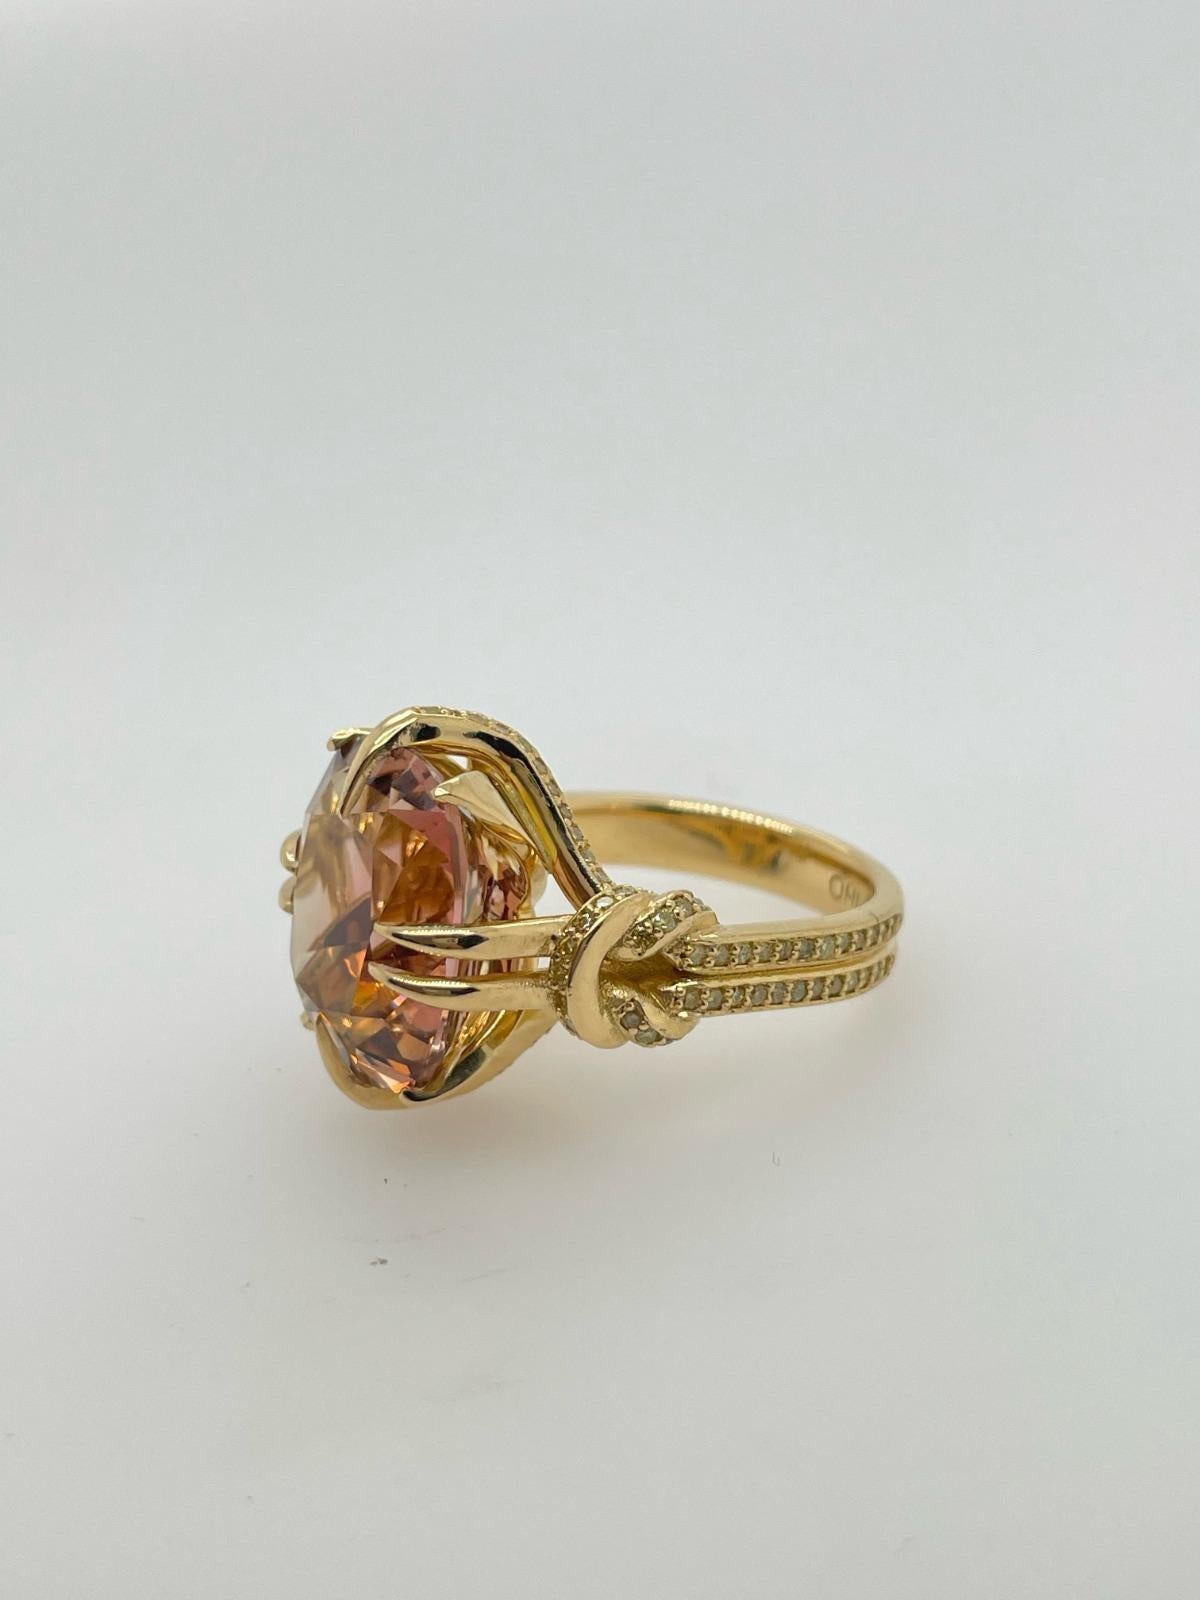 10.51ct Peach Tourmaline and Yellow Diamond Reef Knot Cocktail Ring in 18ct Gold For Sale 11